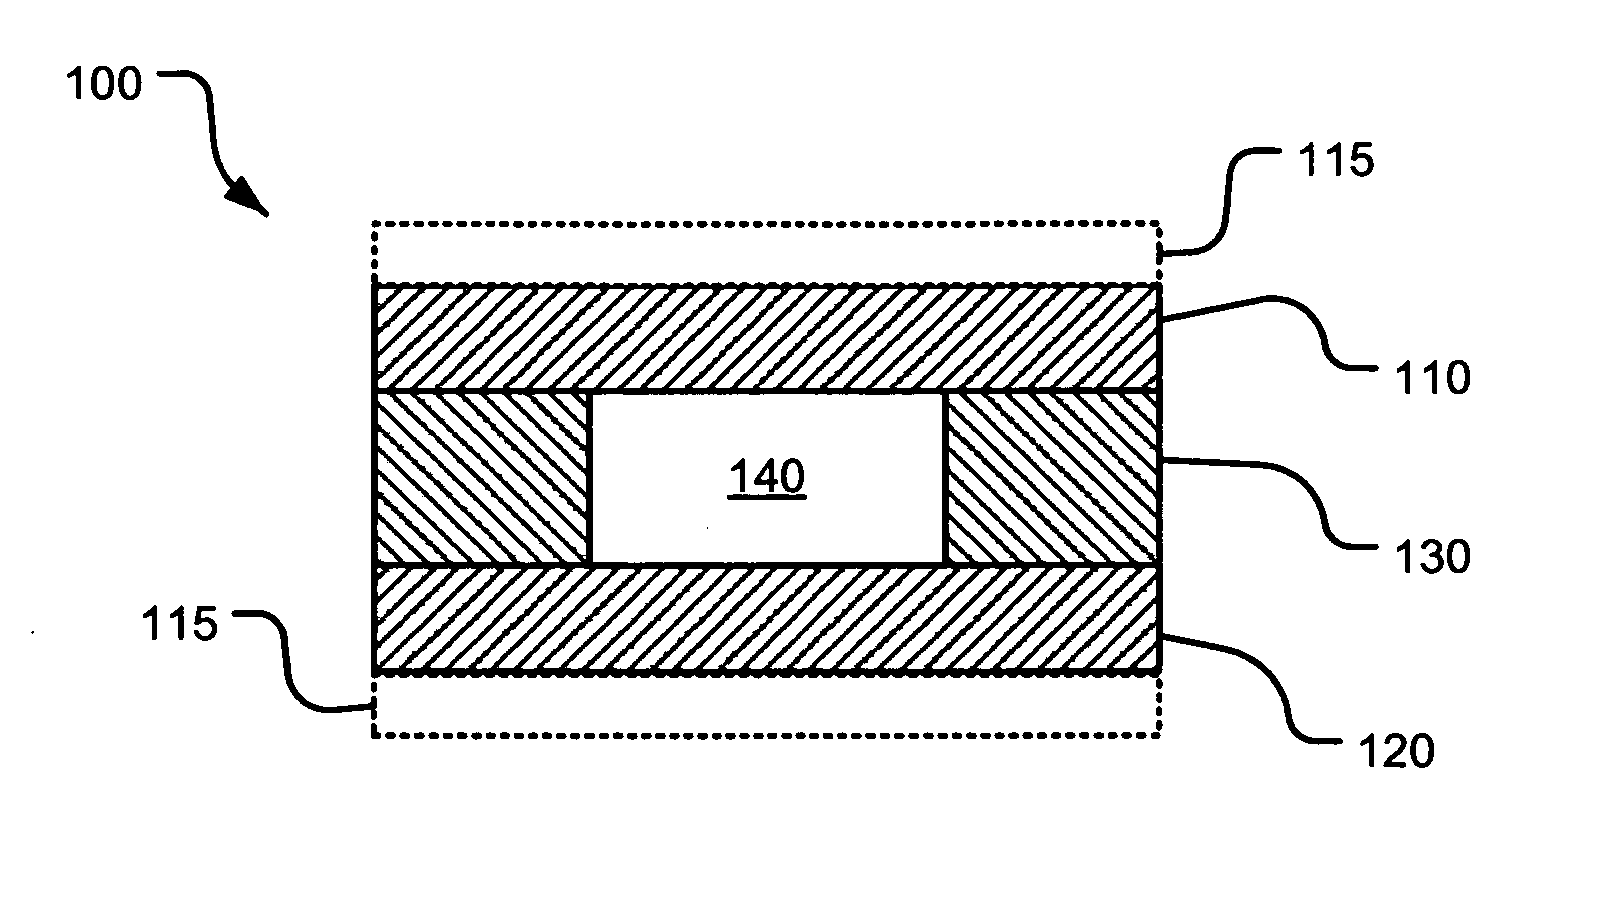 Chip-scale atomic clock (CSAC) and method for making same